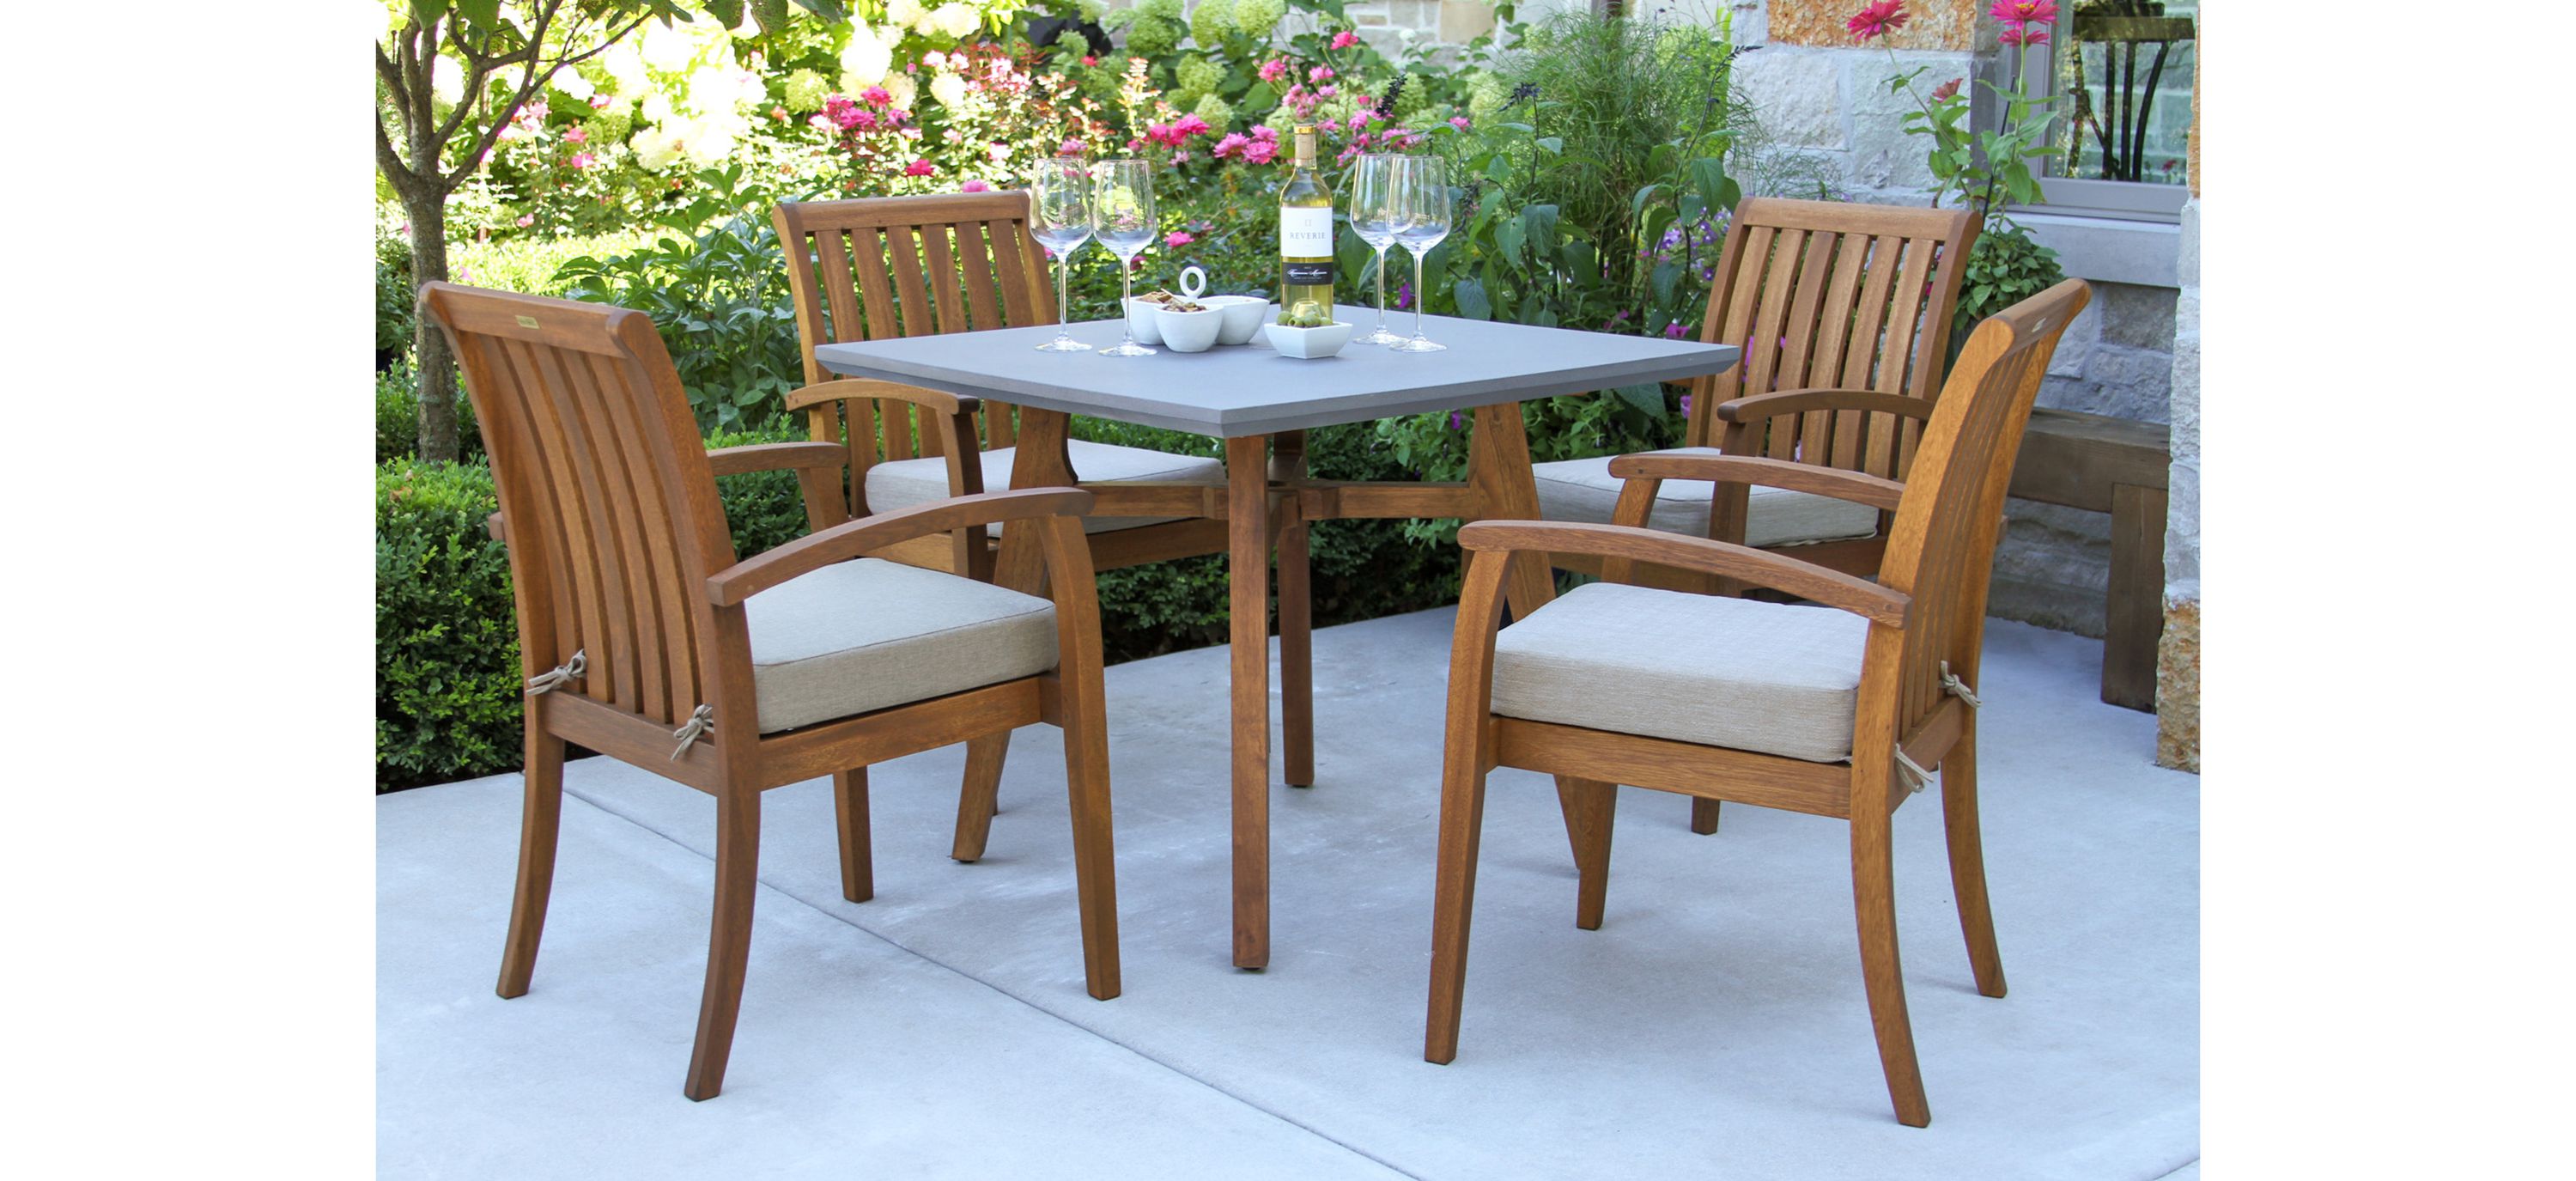 Park Lake 5-pc. Small Space Outdoor Dining Set w/ Eucalyptus Stacking Chairs